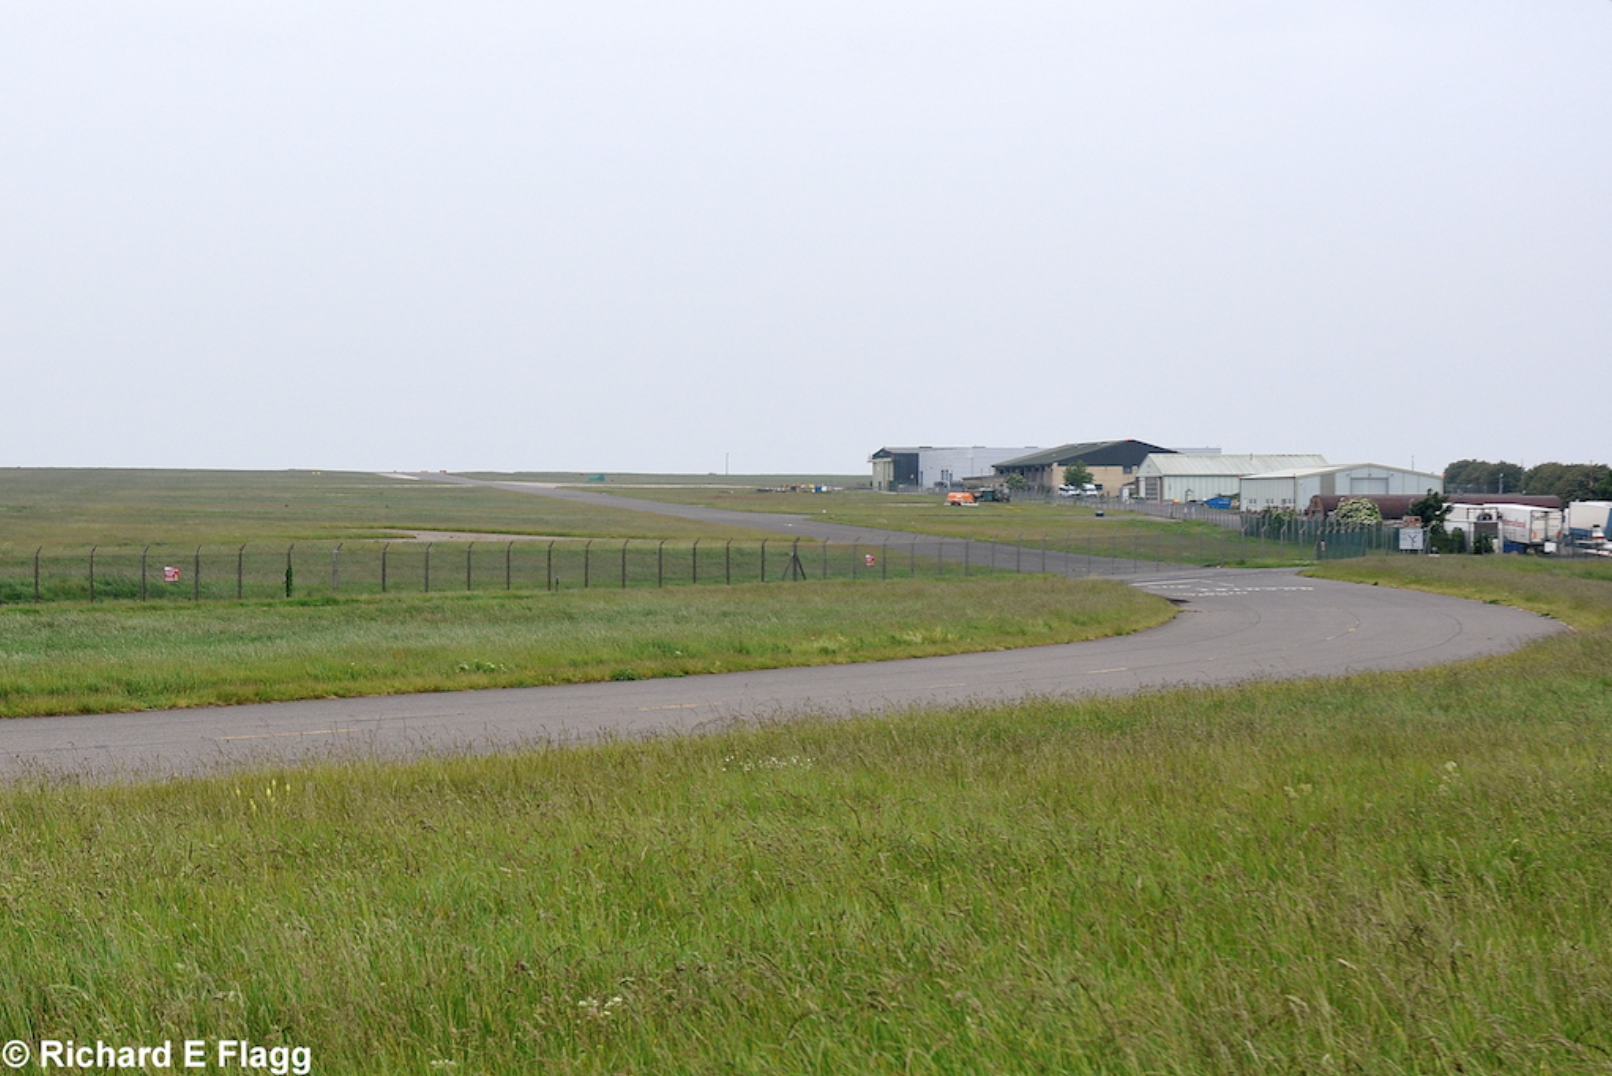 008Taxiway near the Control Tower. Looking south west - 26 May 2014.png